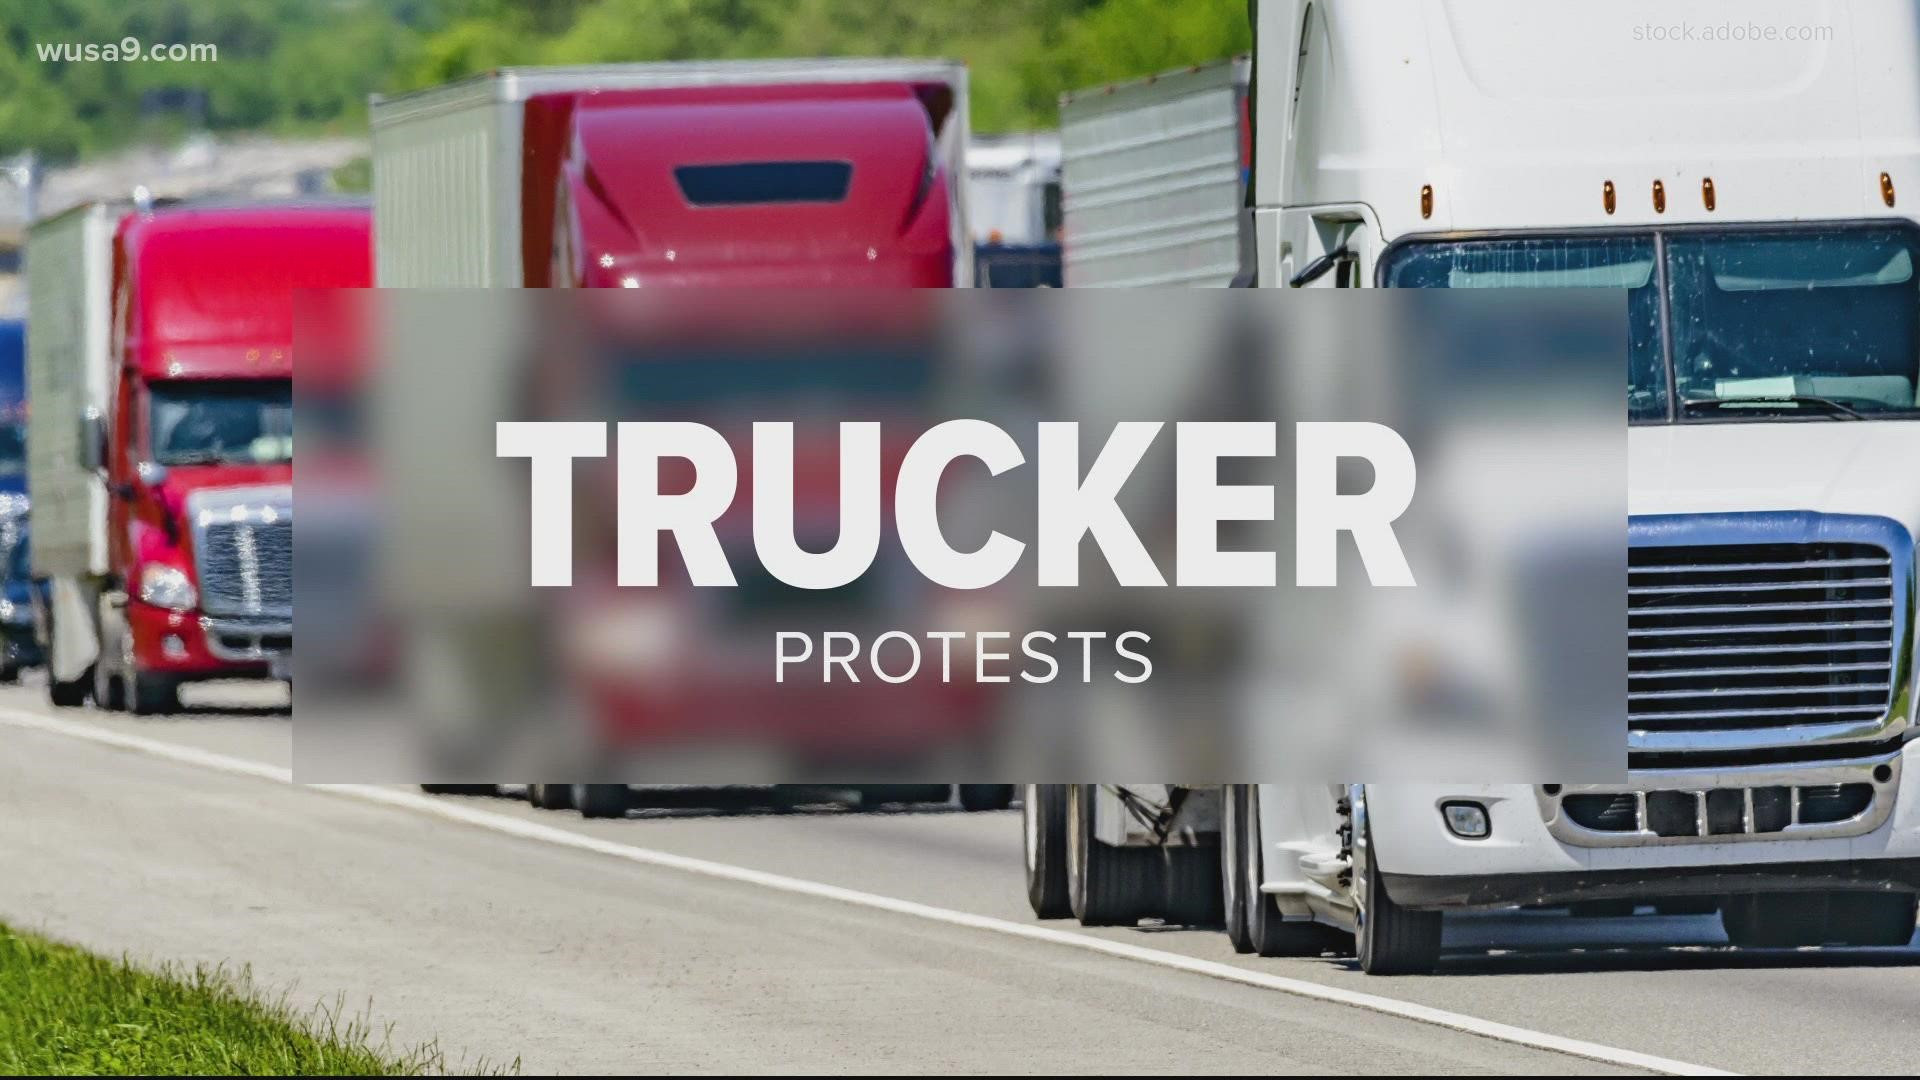 The first wave of protesters will be departing from Scranton, Pennsylvania on Wednesday morning and could bring delays on I-495.